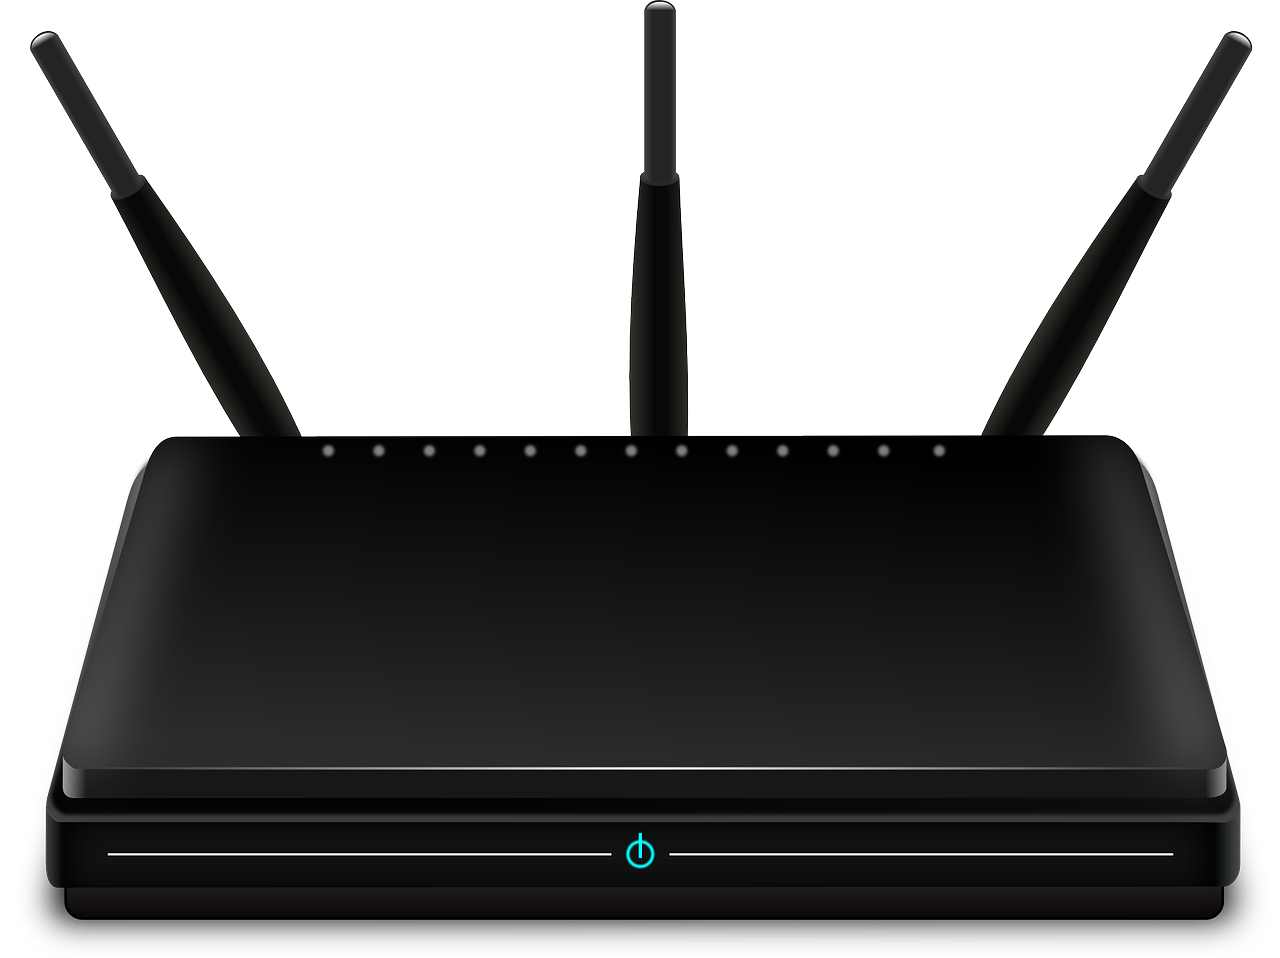 router 157597 1280